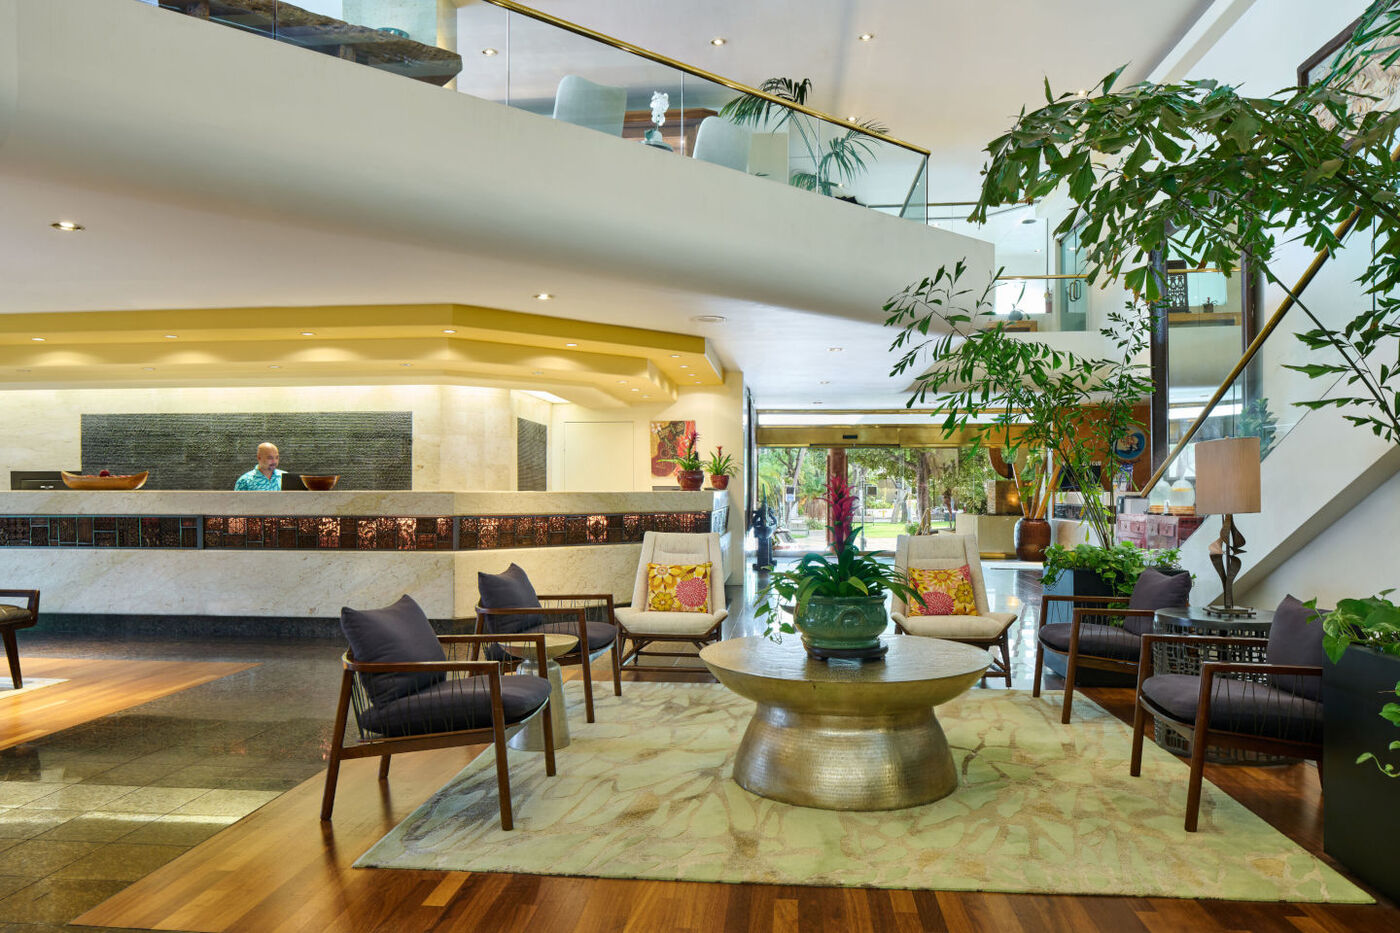 Lobby and front desk at the Luana Waikiki Hotel with comfortable seating area and tropical plants